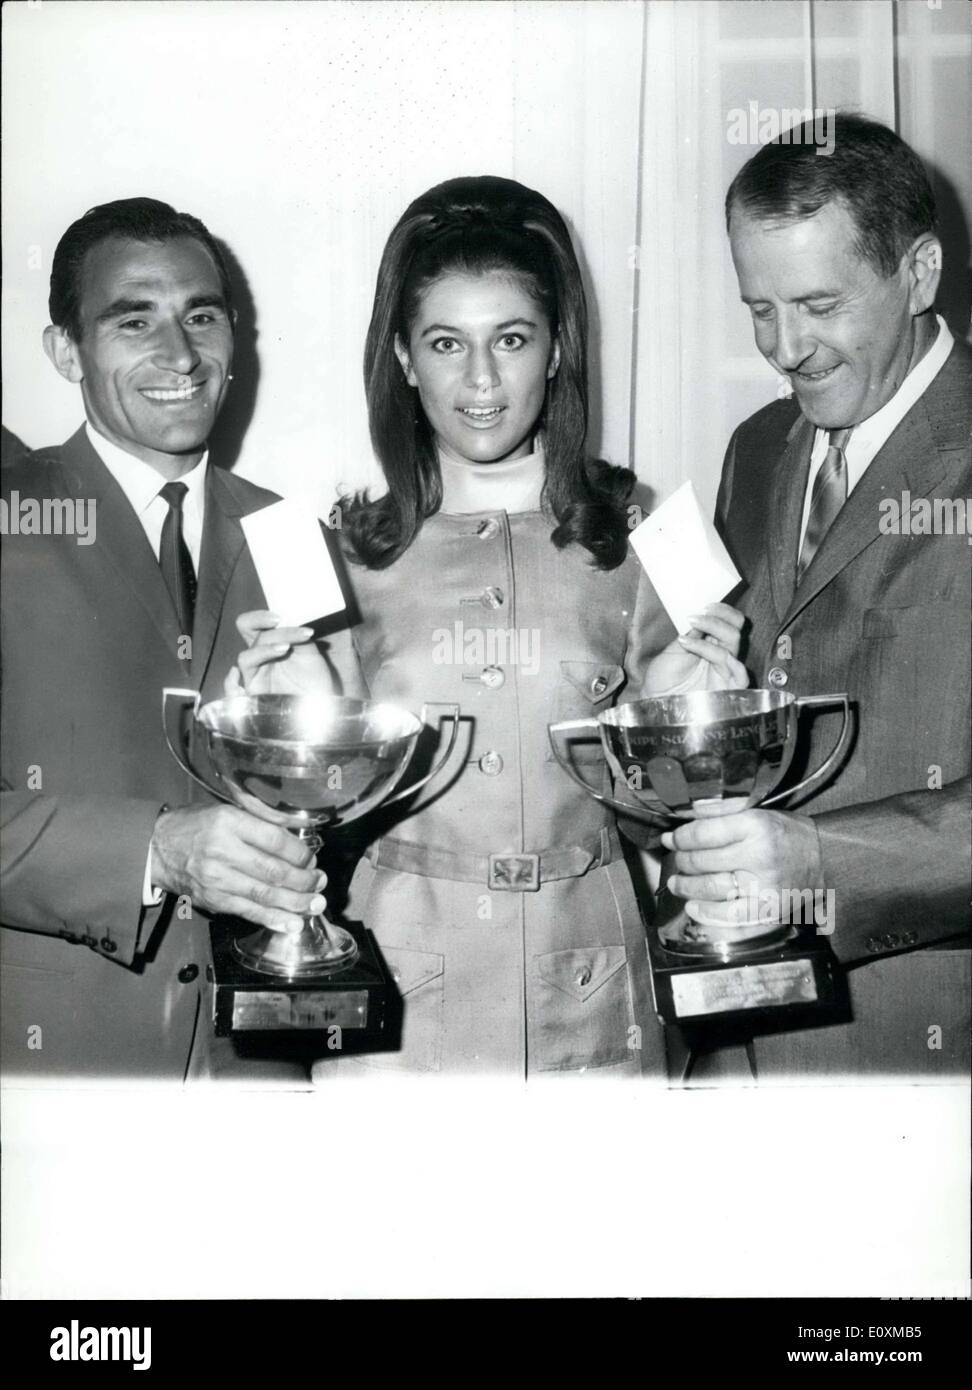 May 18, 1967 - The young singer Sheila drew the second round of the Davis Cup, an international tennis competition, in which France and Hungary will compete. Pictured: During the random drawing, from left to right, Gulyas, Sheila, and Bernard, Captain of France's team. Stock Photo